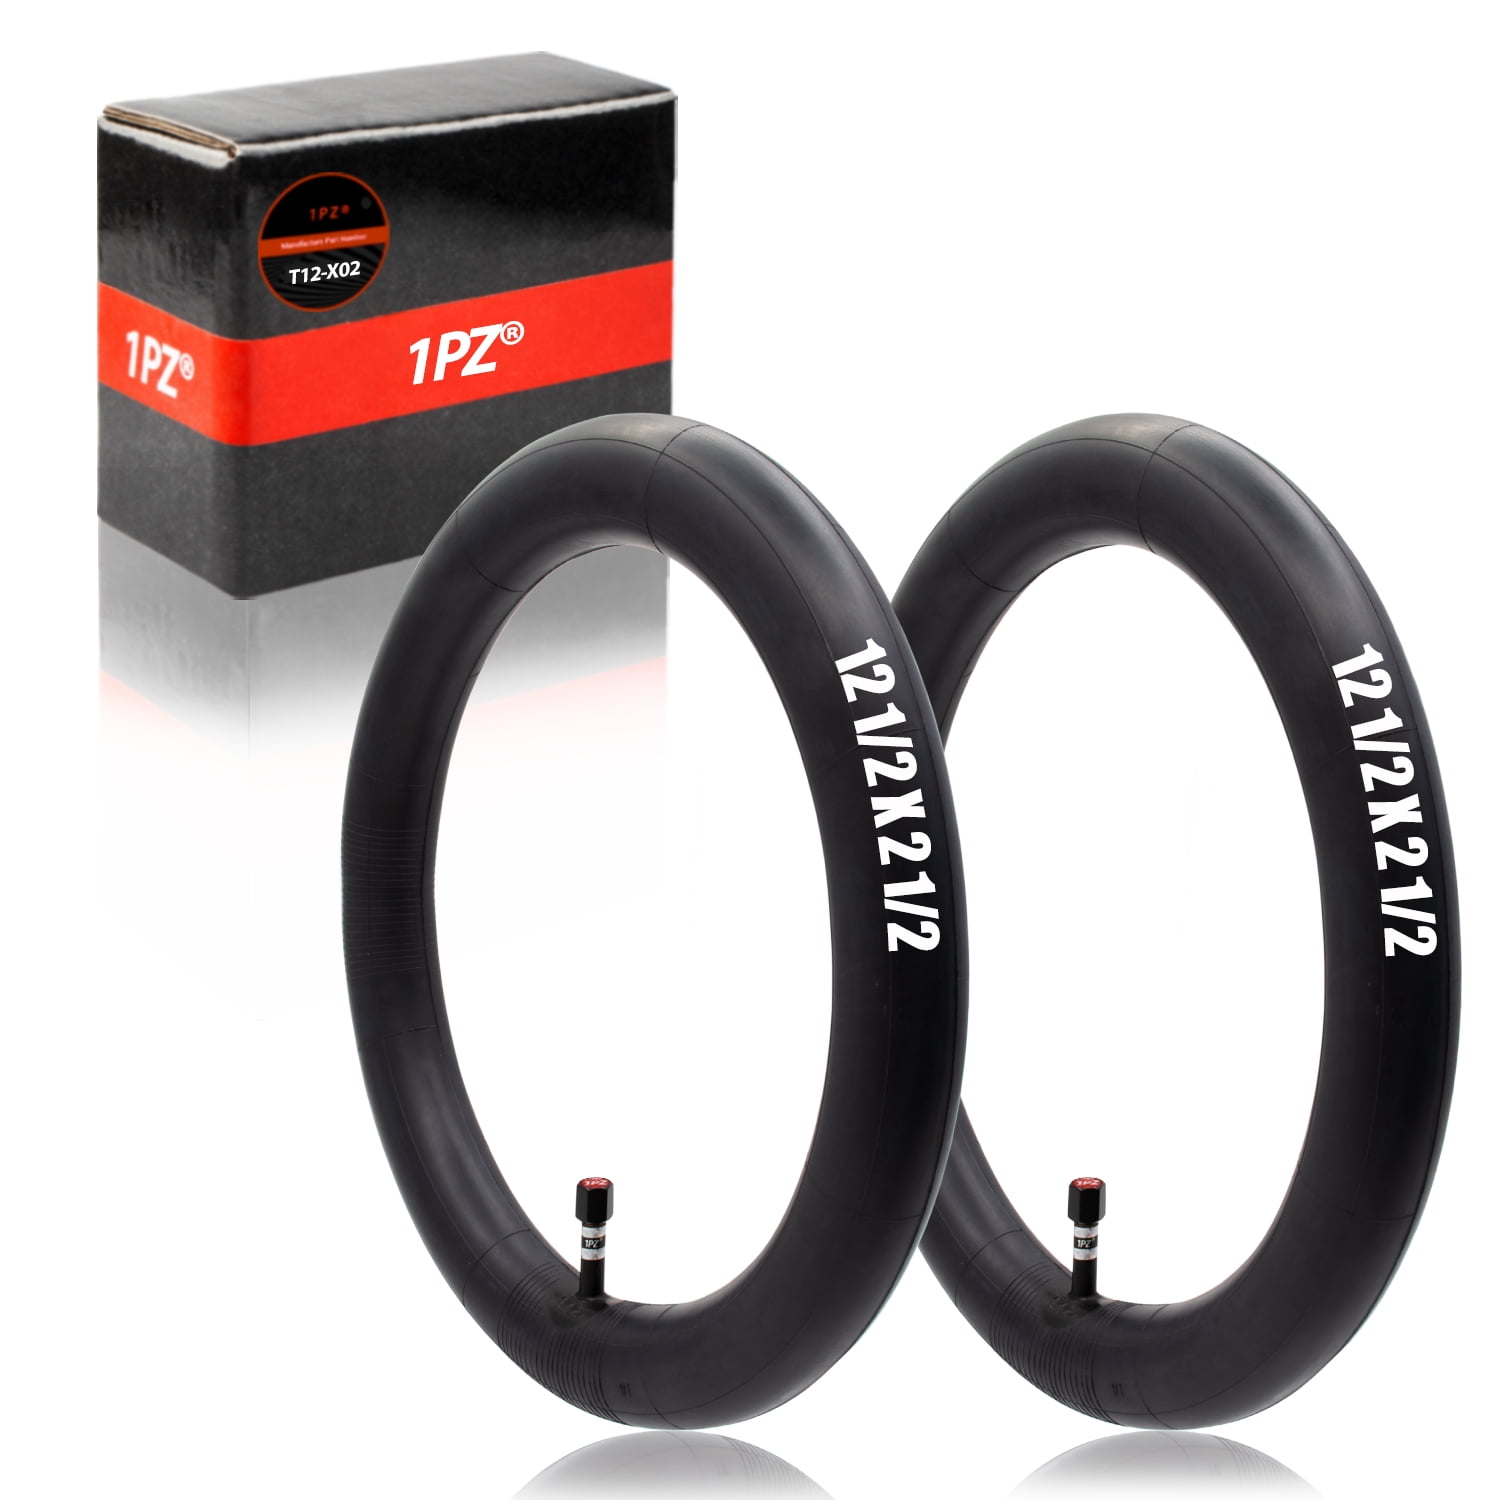 Tire 12.5x2.5 Inner Tube 12 1/2 x 2.50 Inch Fit Dune Buggy Bicycle Scooter Razor